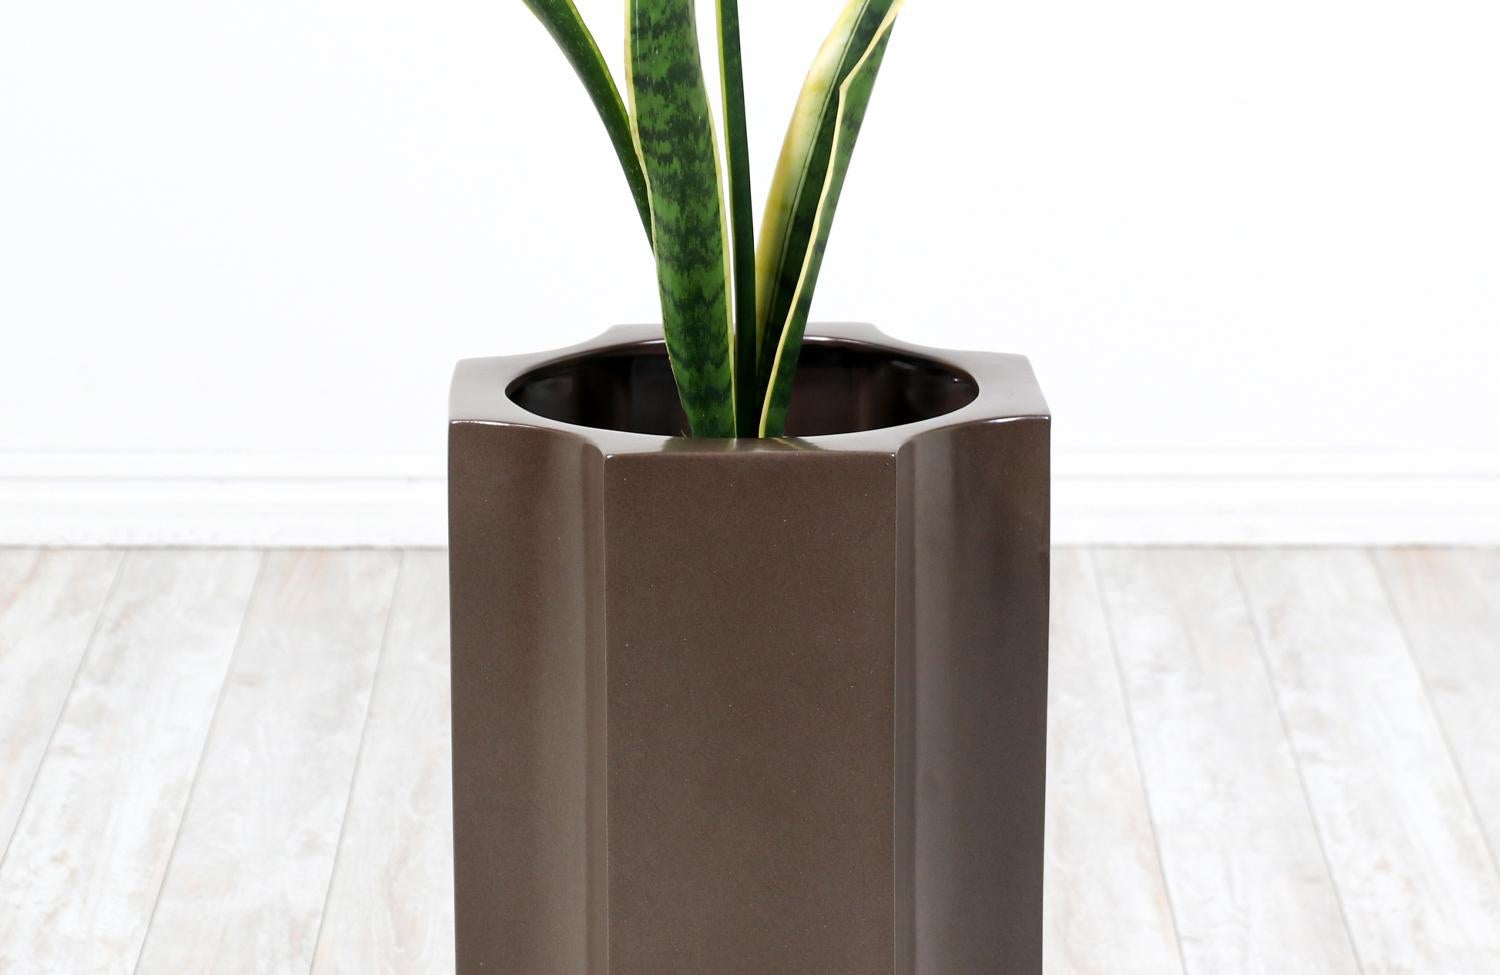 American David Cressey Sculpted Geometric Brown Planter for Architectural Pottery